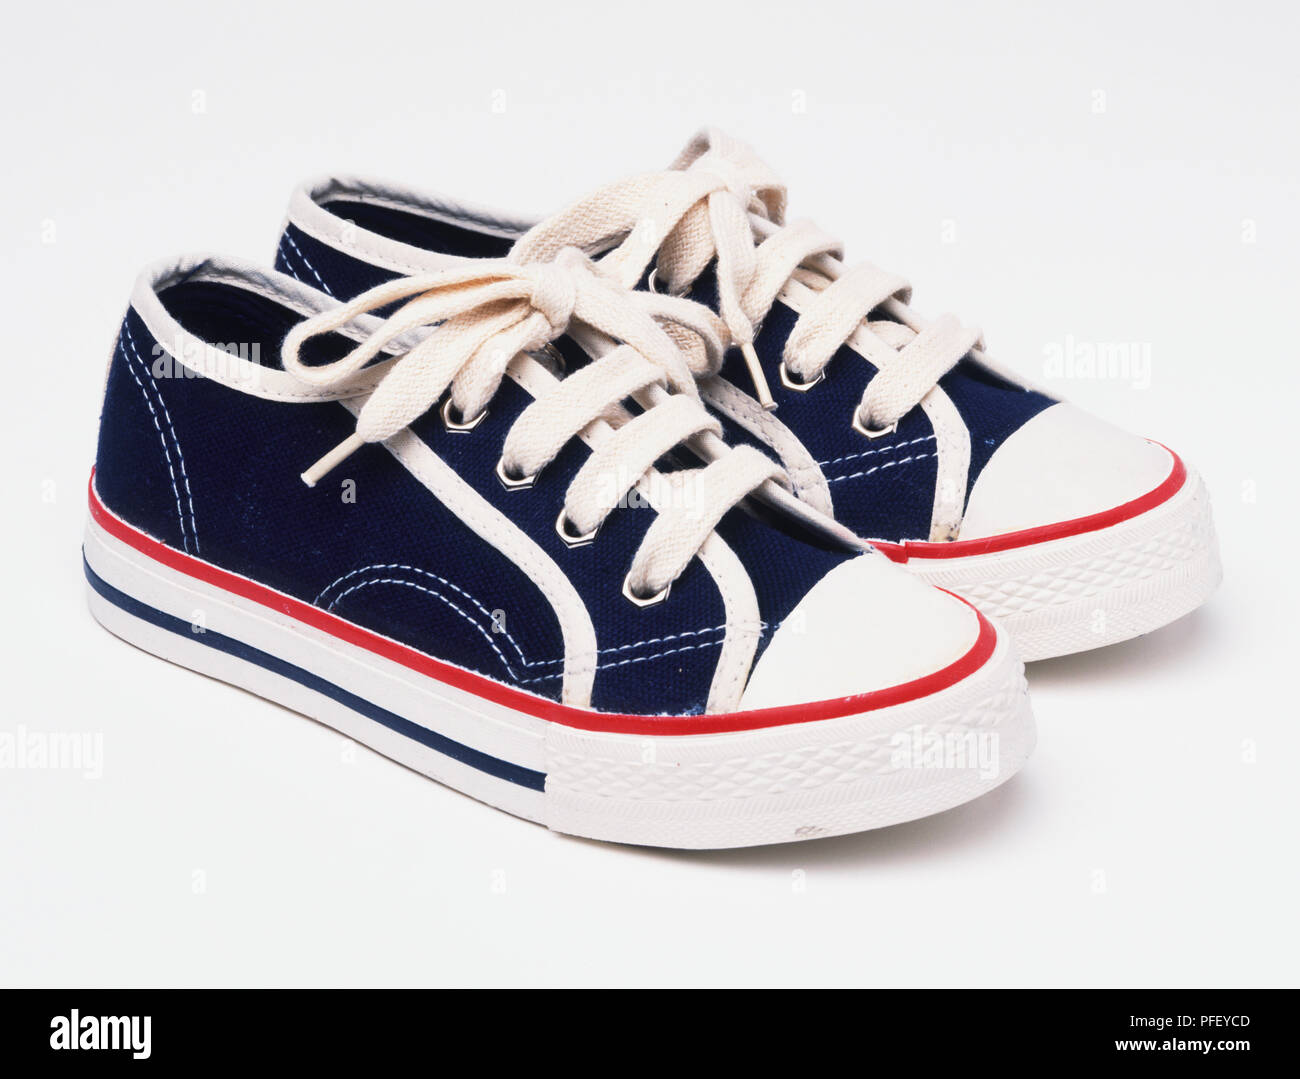 Pair of dark blue trainers with laces tied Stock Photo